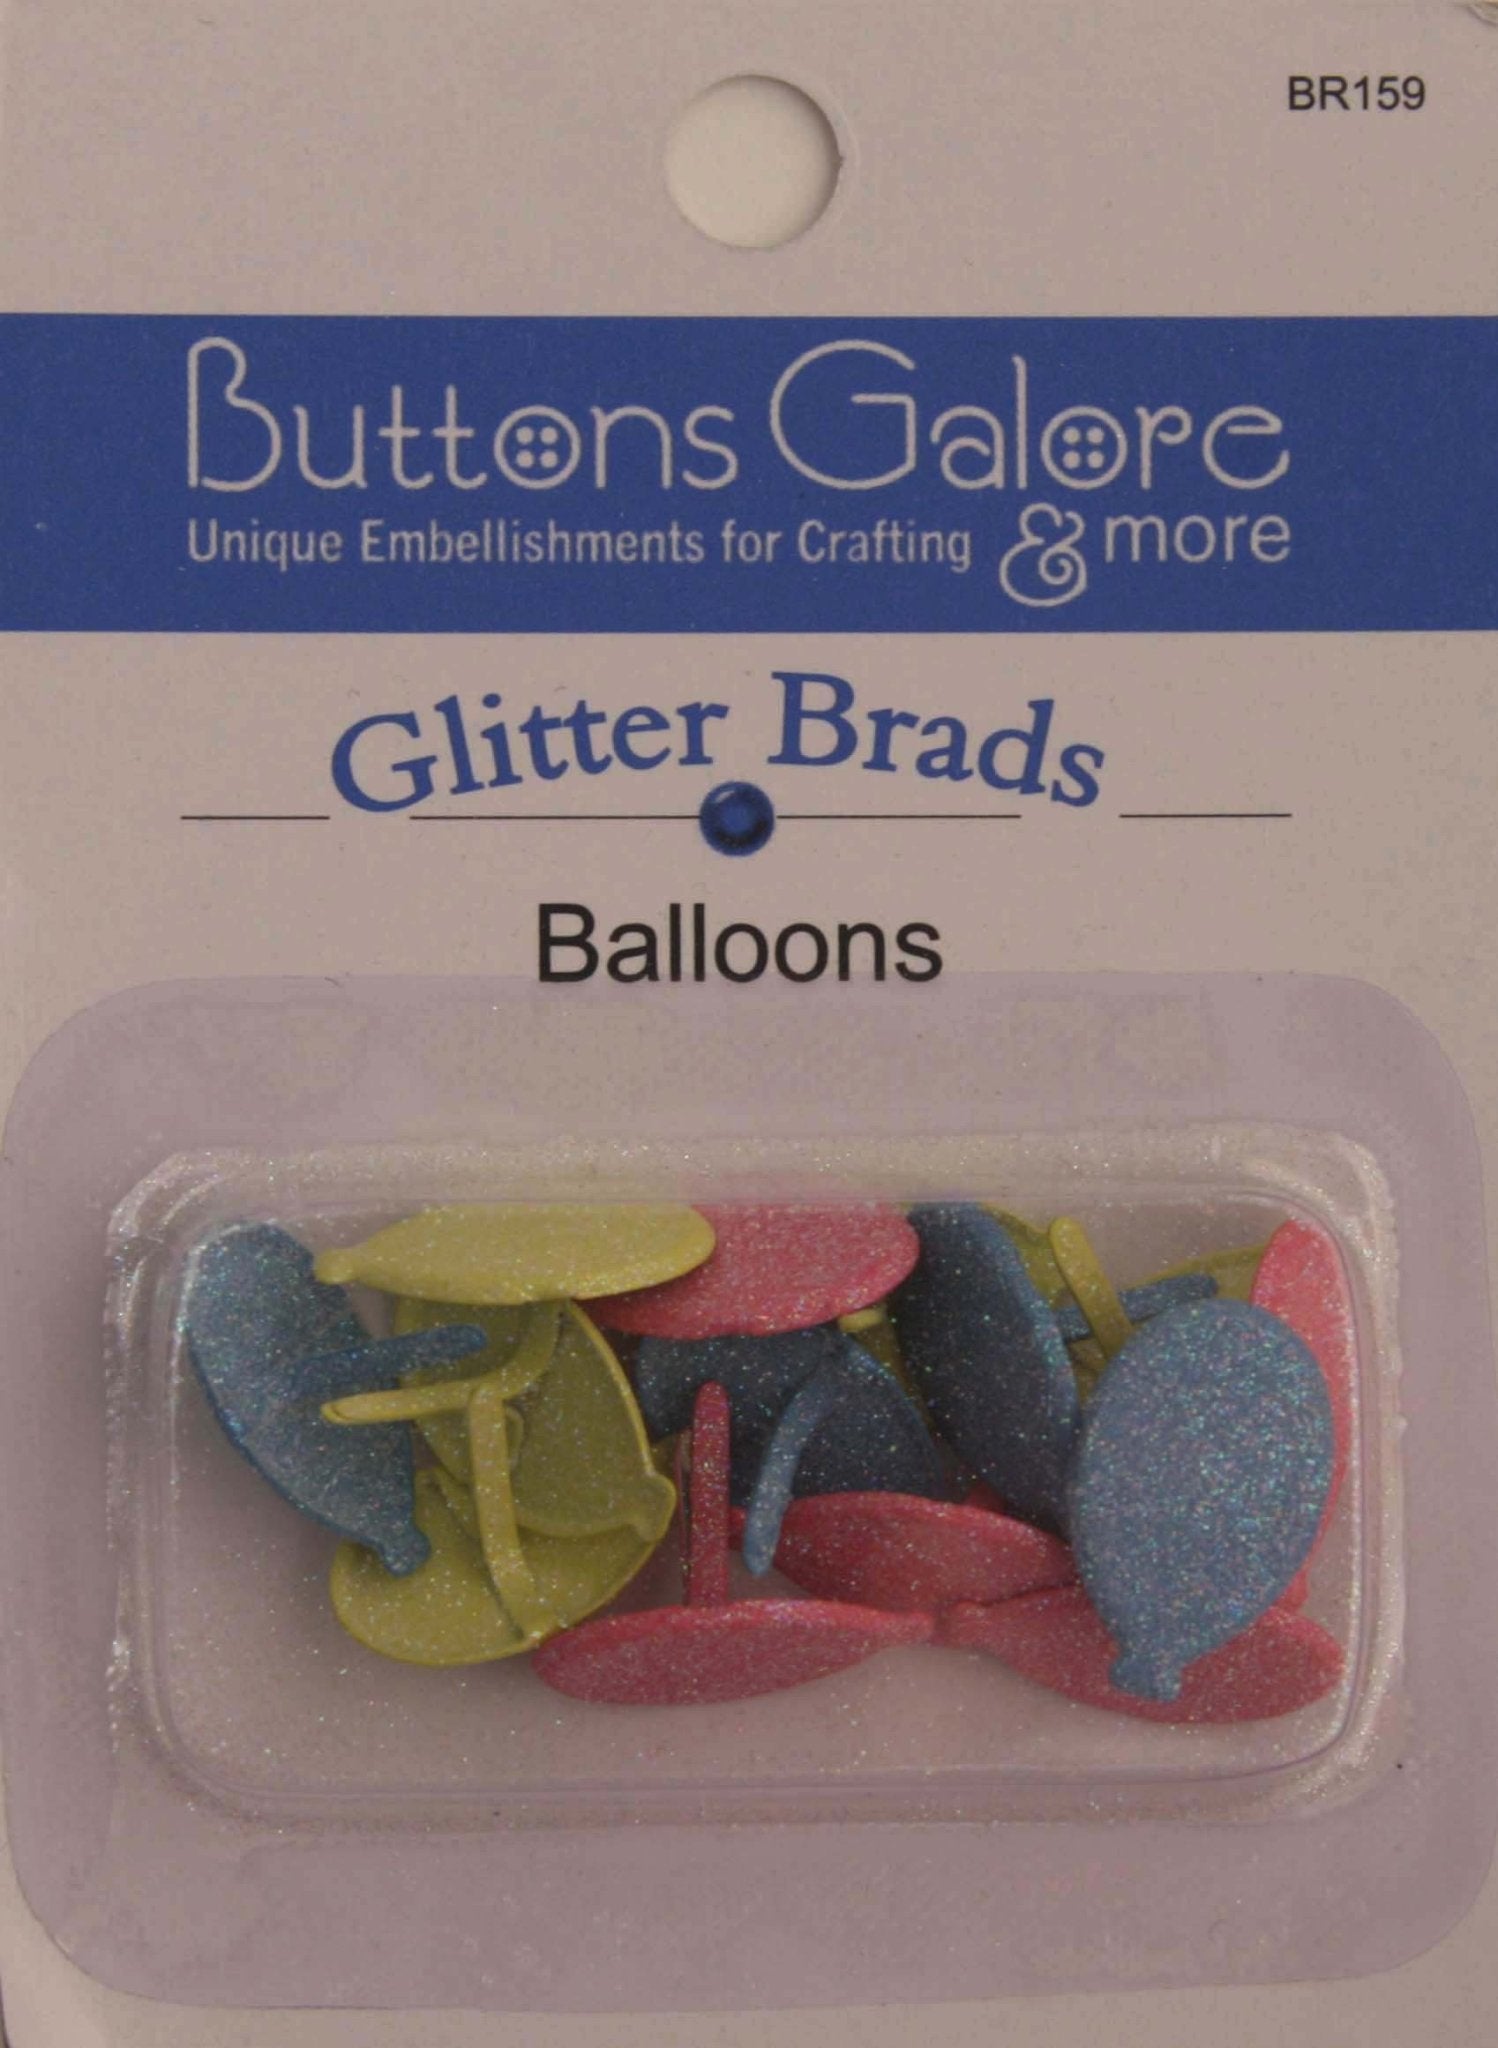 Glitter Brads Balloons - BR159 - Buttons Galore and More